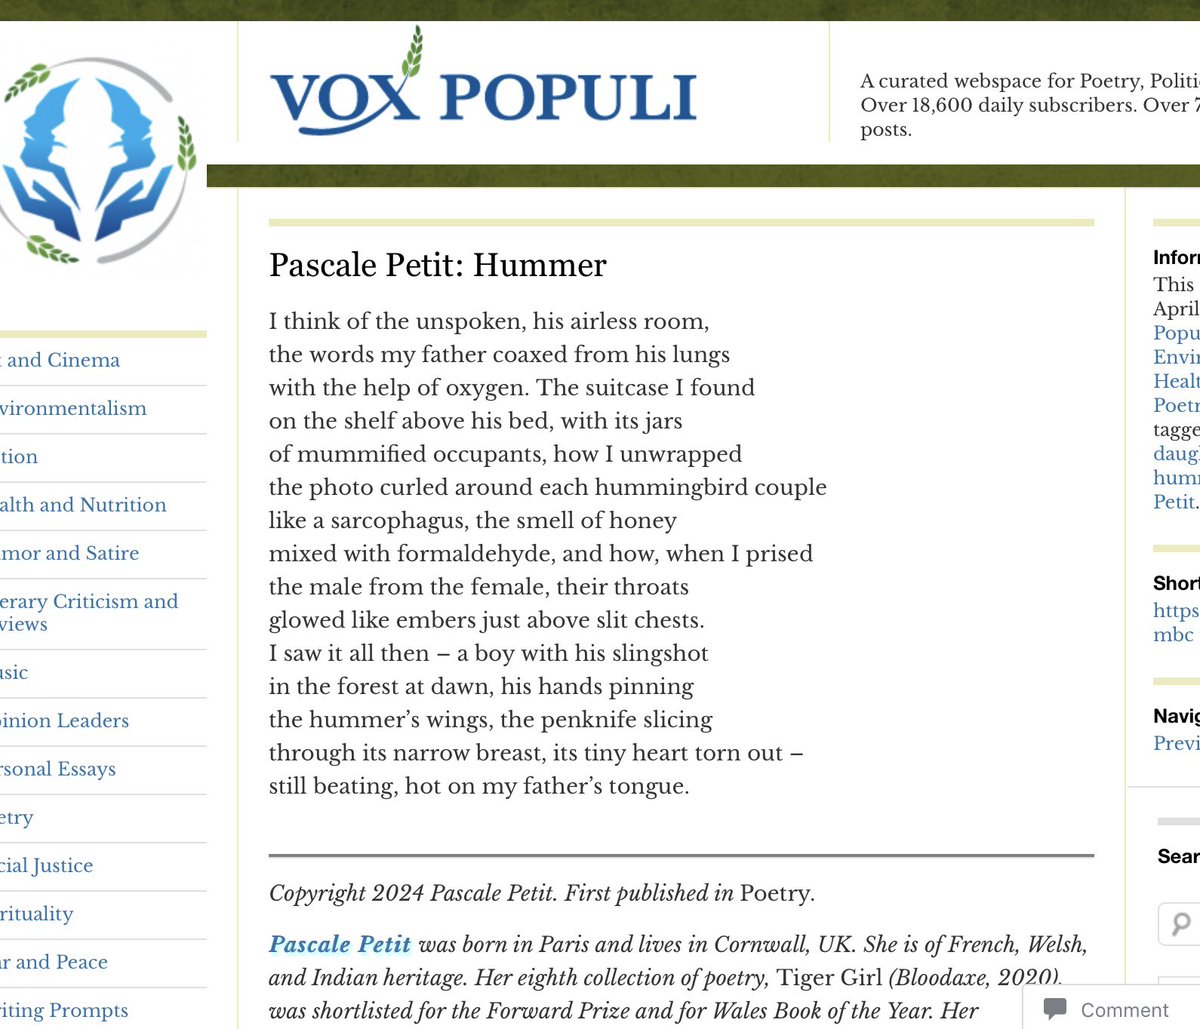 Thanks Michael Simms for posting ‘Hummer’ on Vox Populi today! The poem was 1st published @poetrymagazine & will be included in my next collection Beast @BloodaxeBooks next April. It appears as I’m proofing my novel ‘My Hummingbird Father’ @saltpublishing wp.me/p4xqzG-mbc